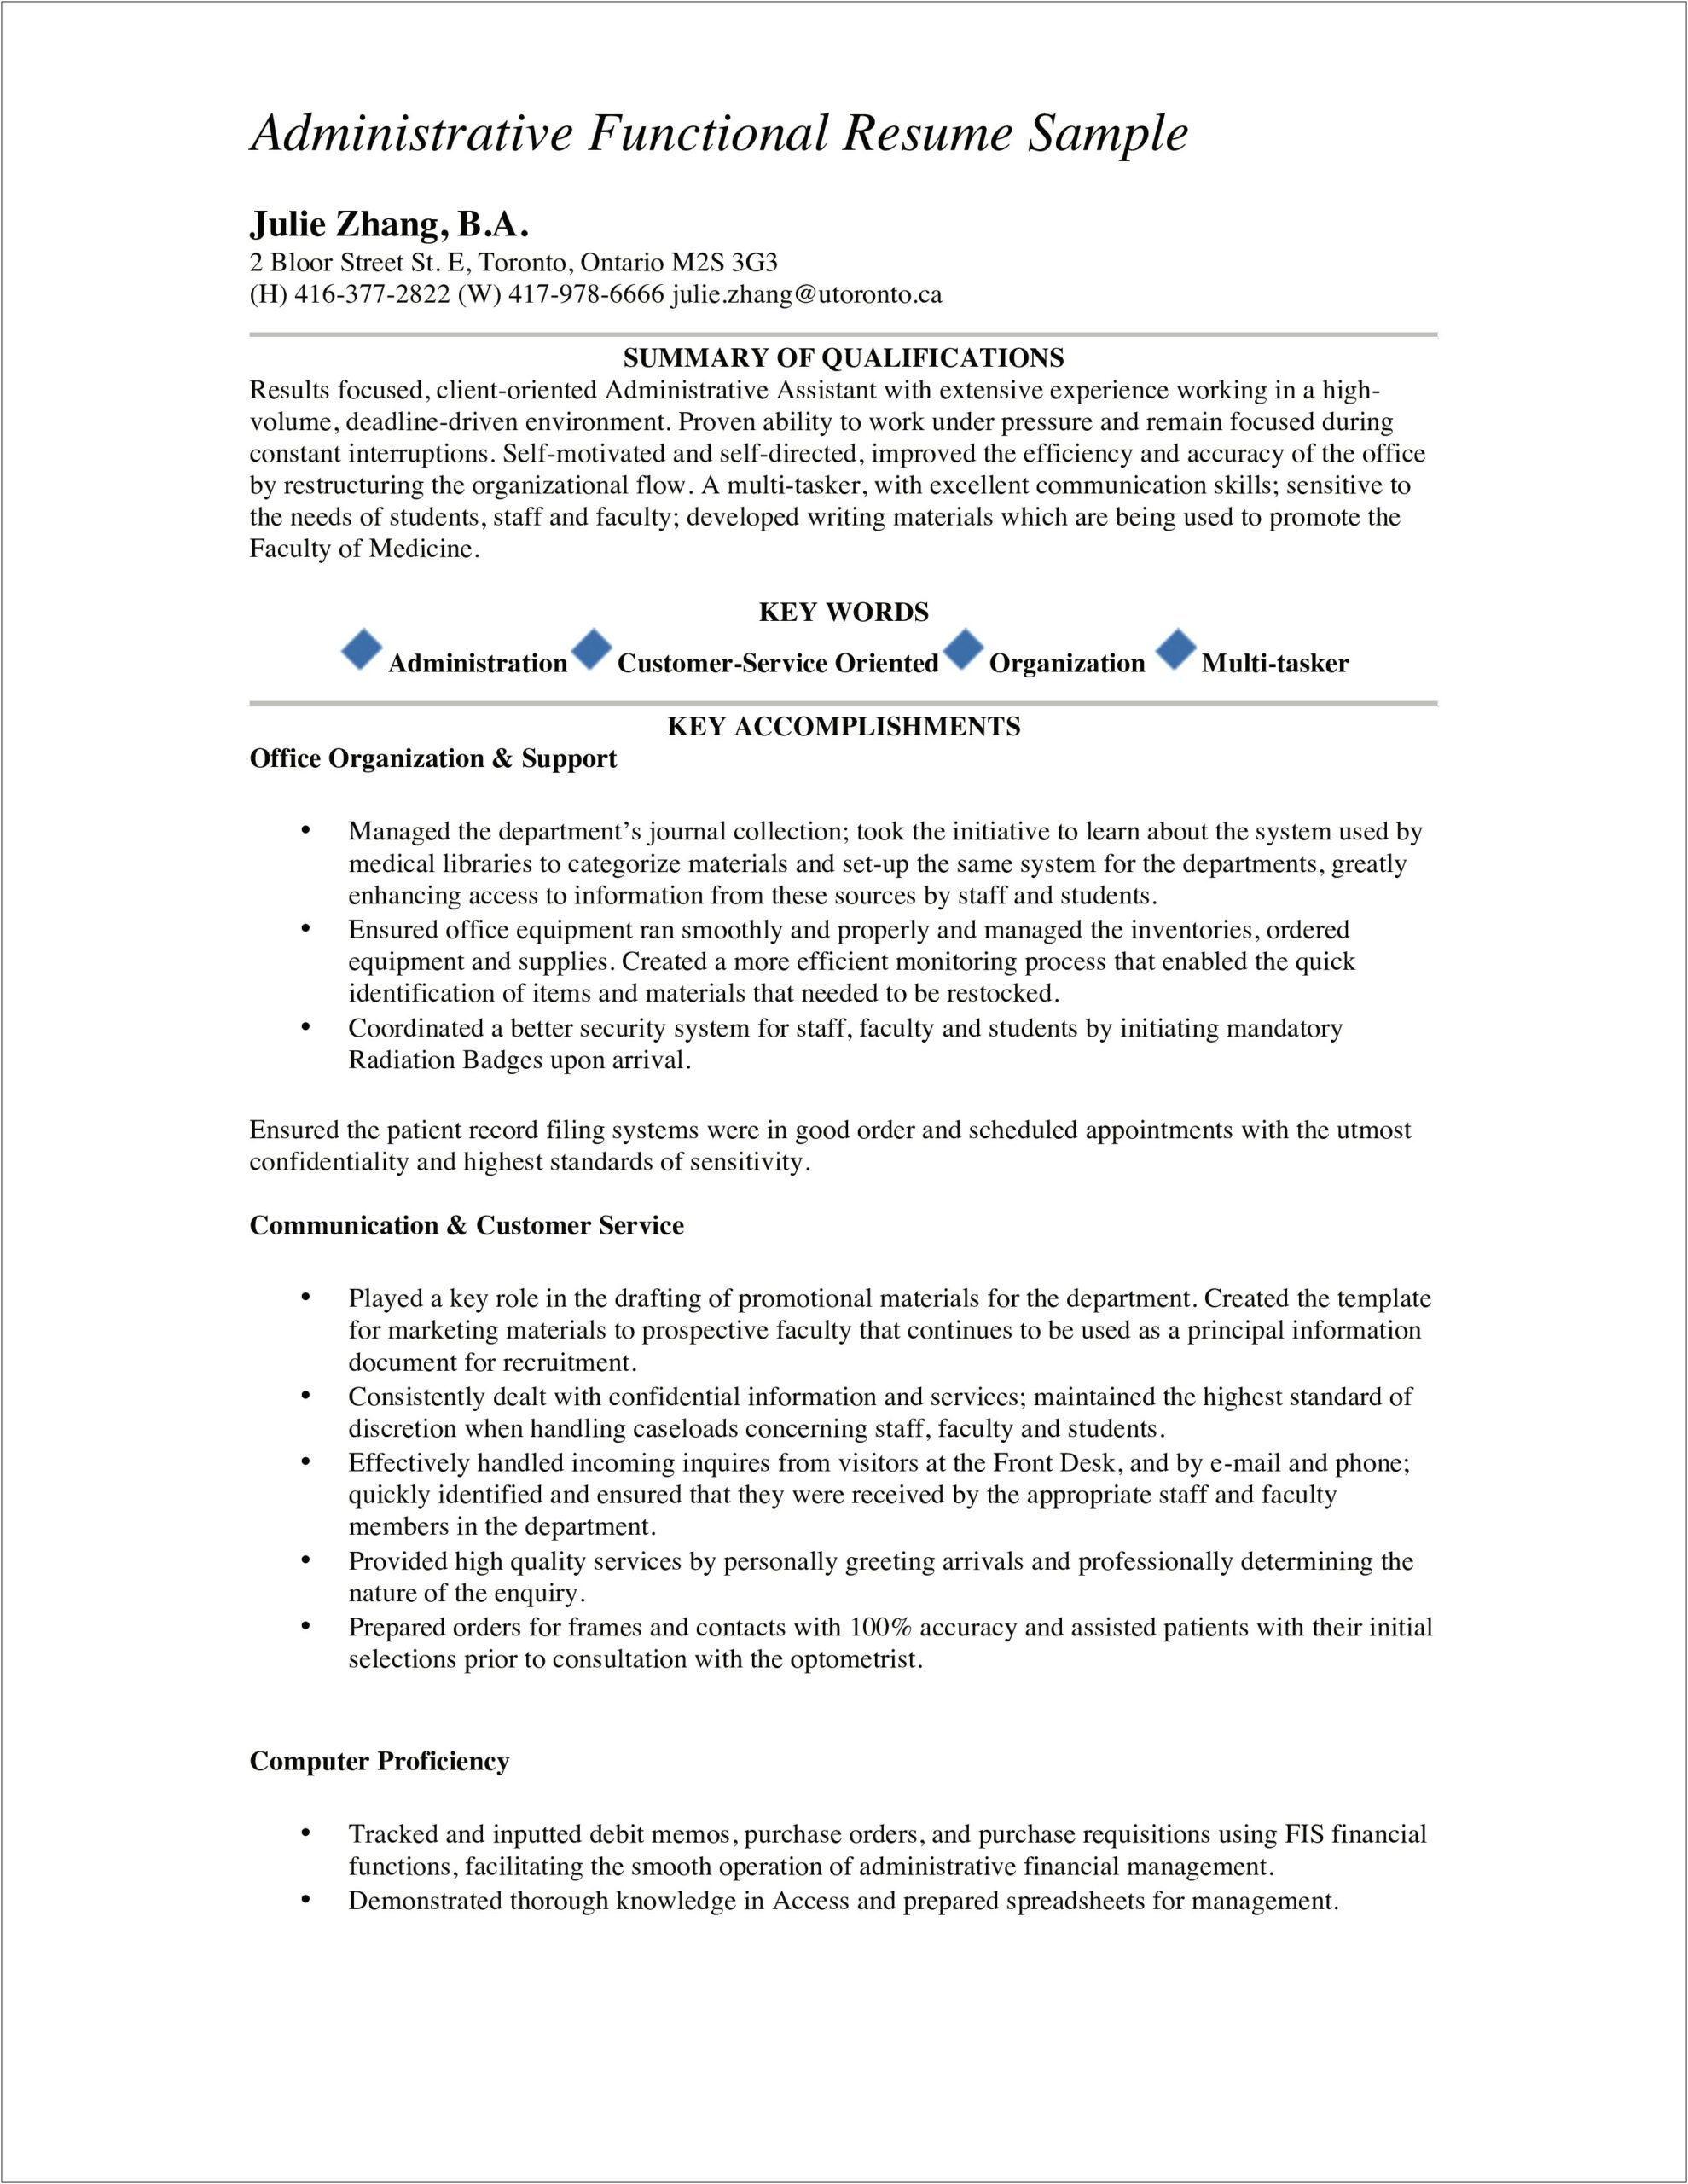 Resume Example Of Administrative Assistant